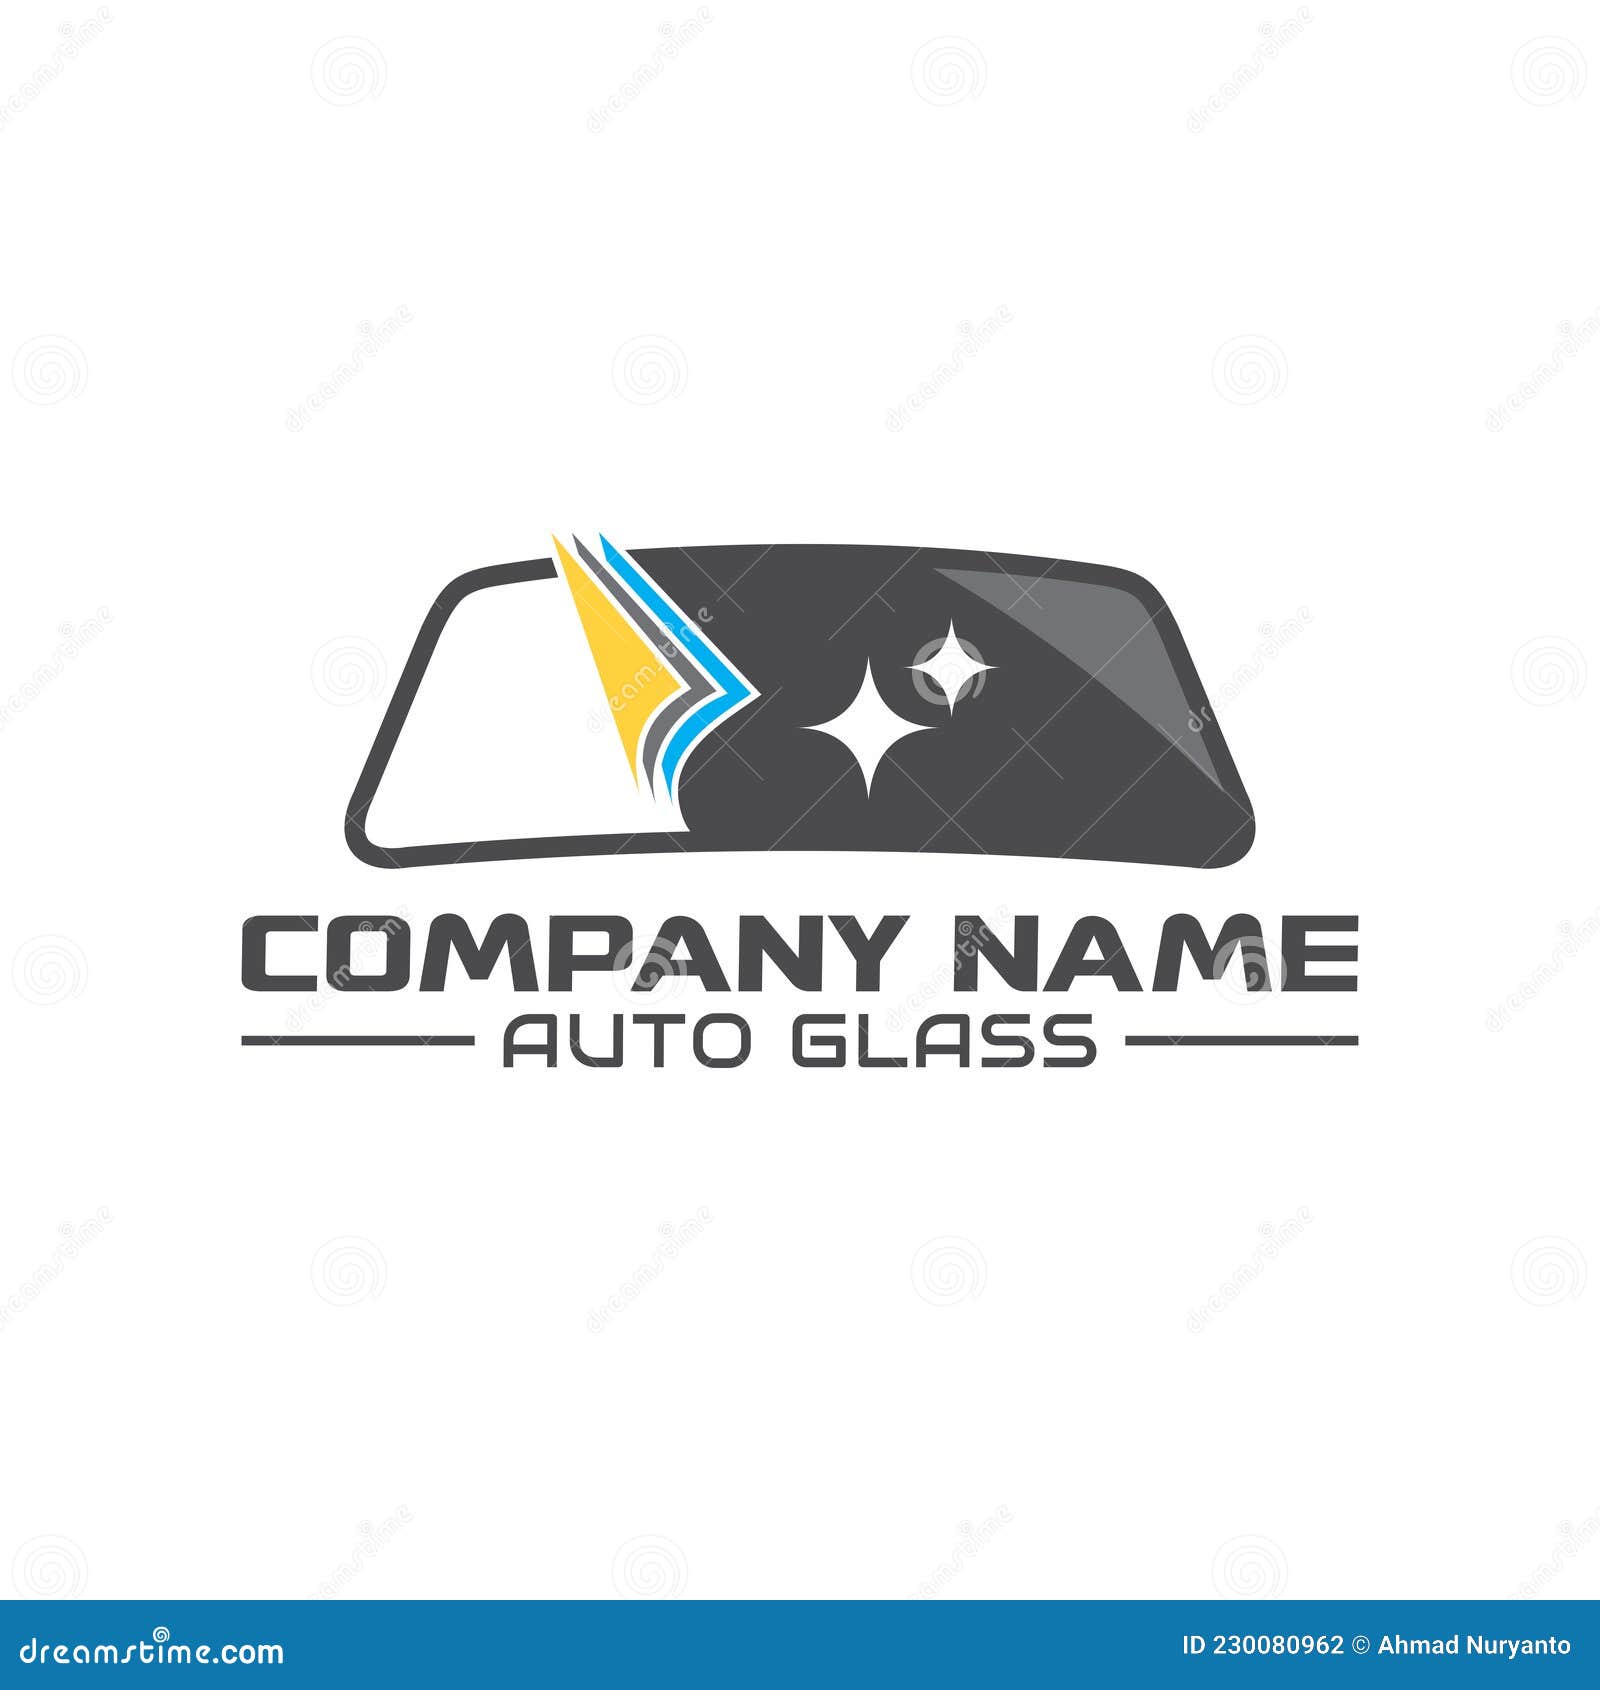 communicative icon of auto glass and tint service